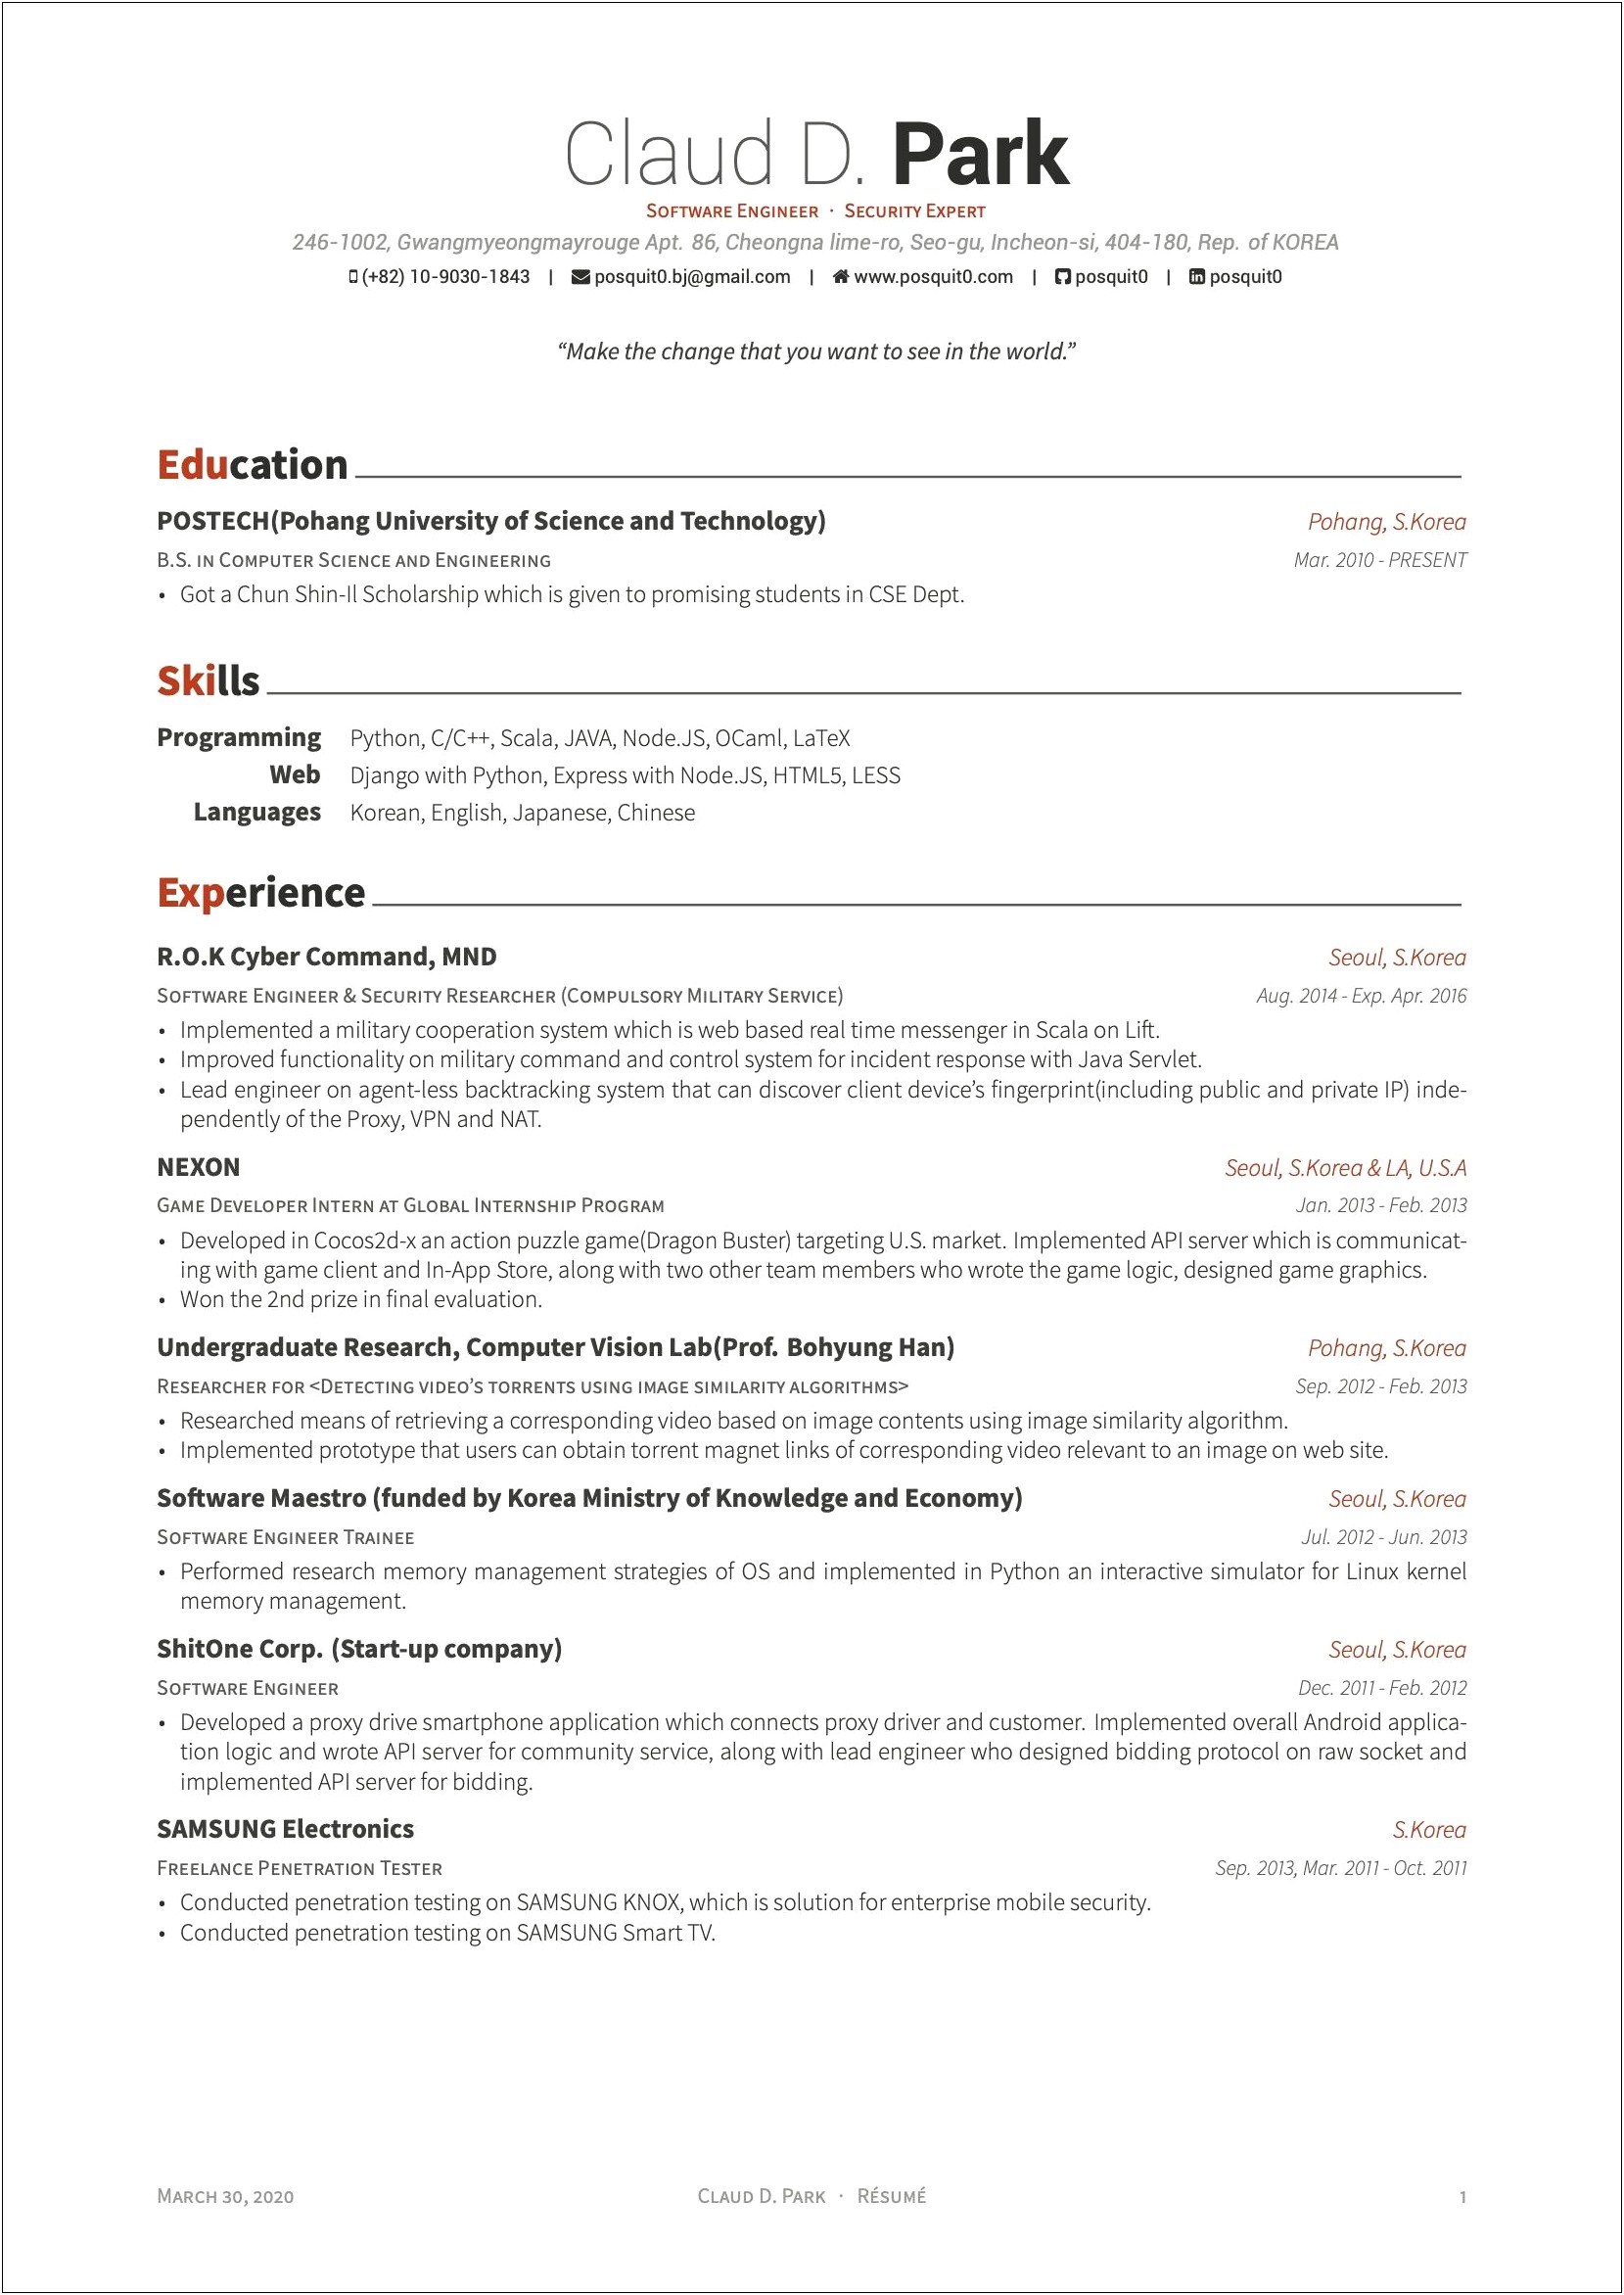 Resumes For People With Little Experience